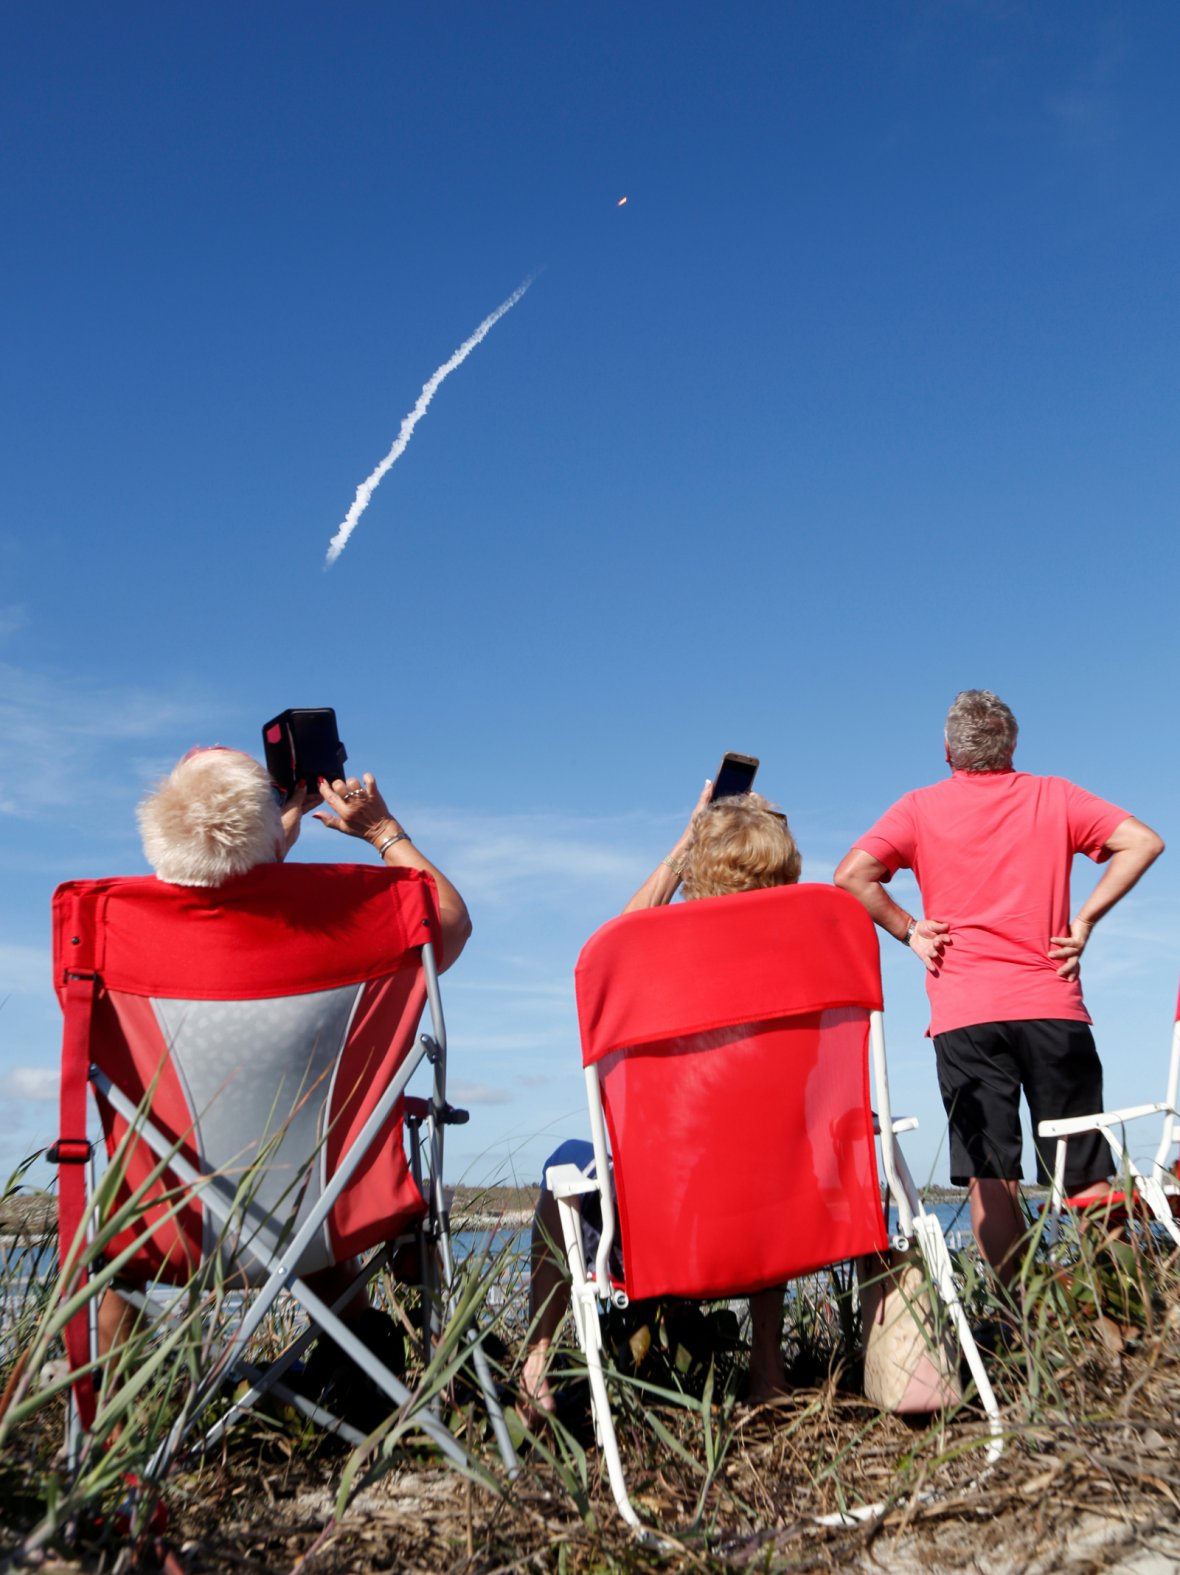 Spectators watch SpaceX's first Falcon Heavy rocket launches from the Kennedy Space Center in Florida